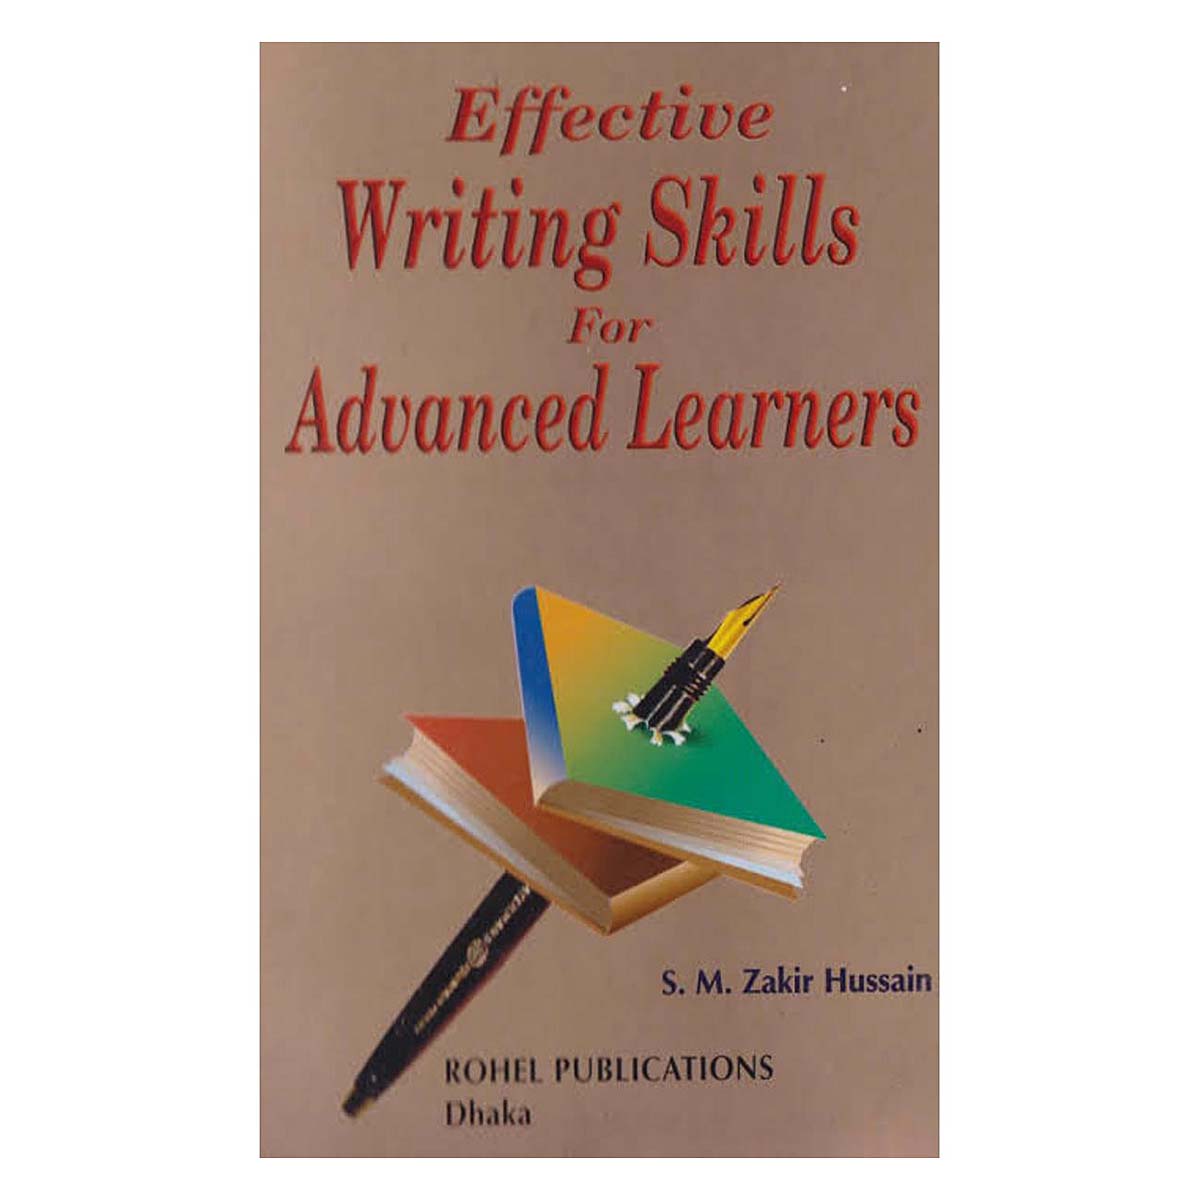 Effective writing skills for Advanced Learners